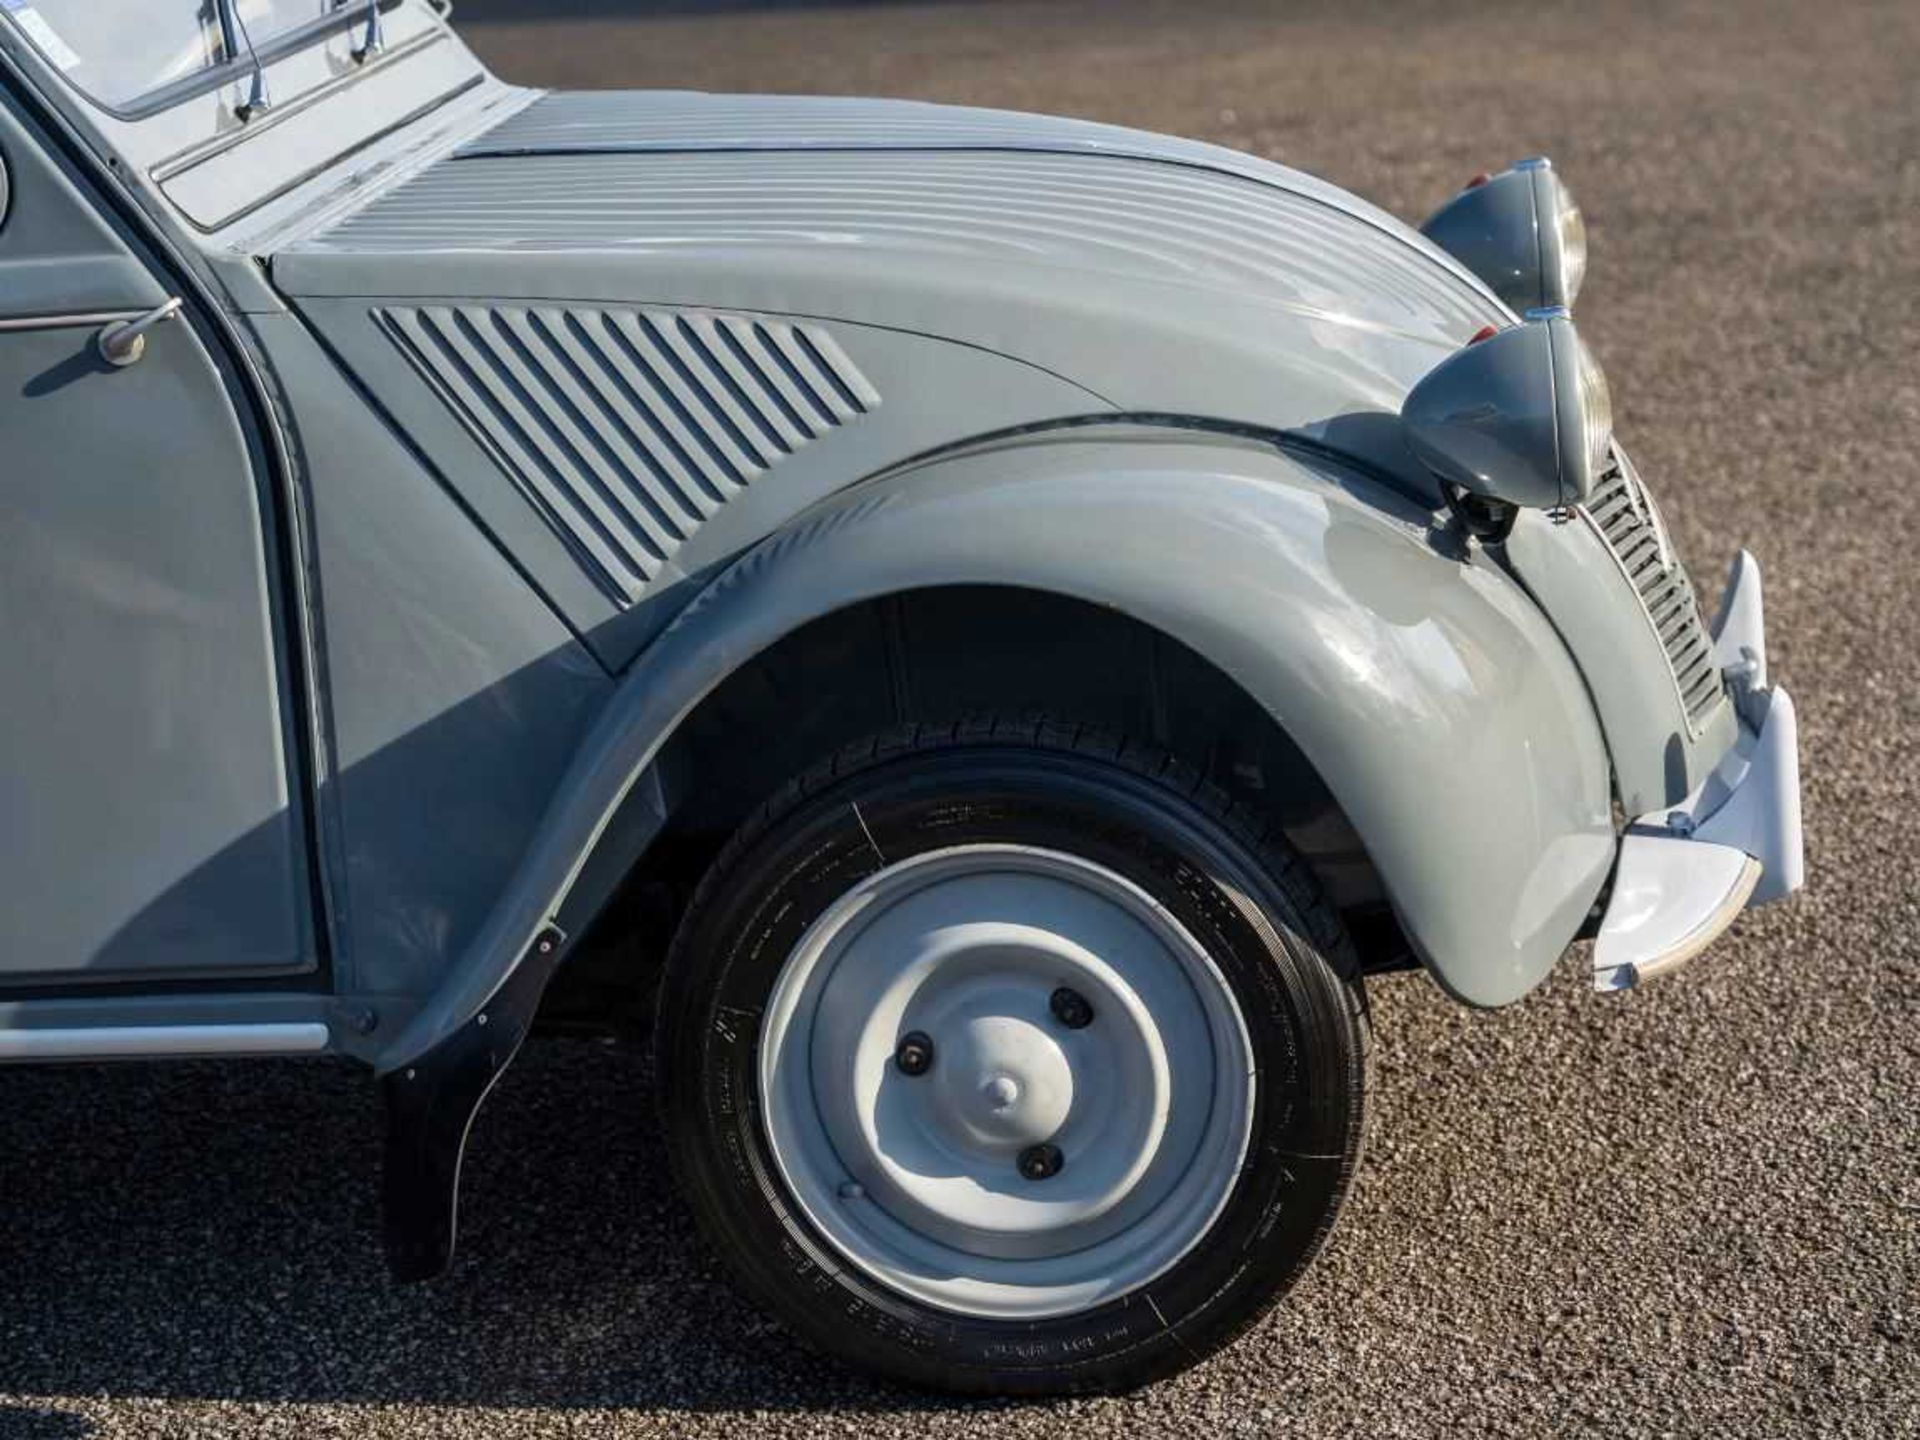 1958 Citroën 2CV AZL A rare, early example, with sought-after 'ripple bonnet' - Image 29 of 77